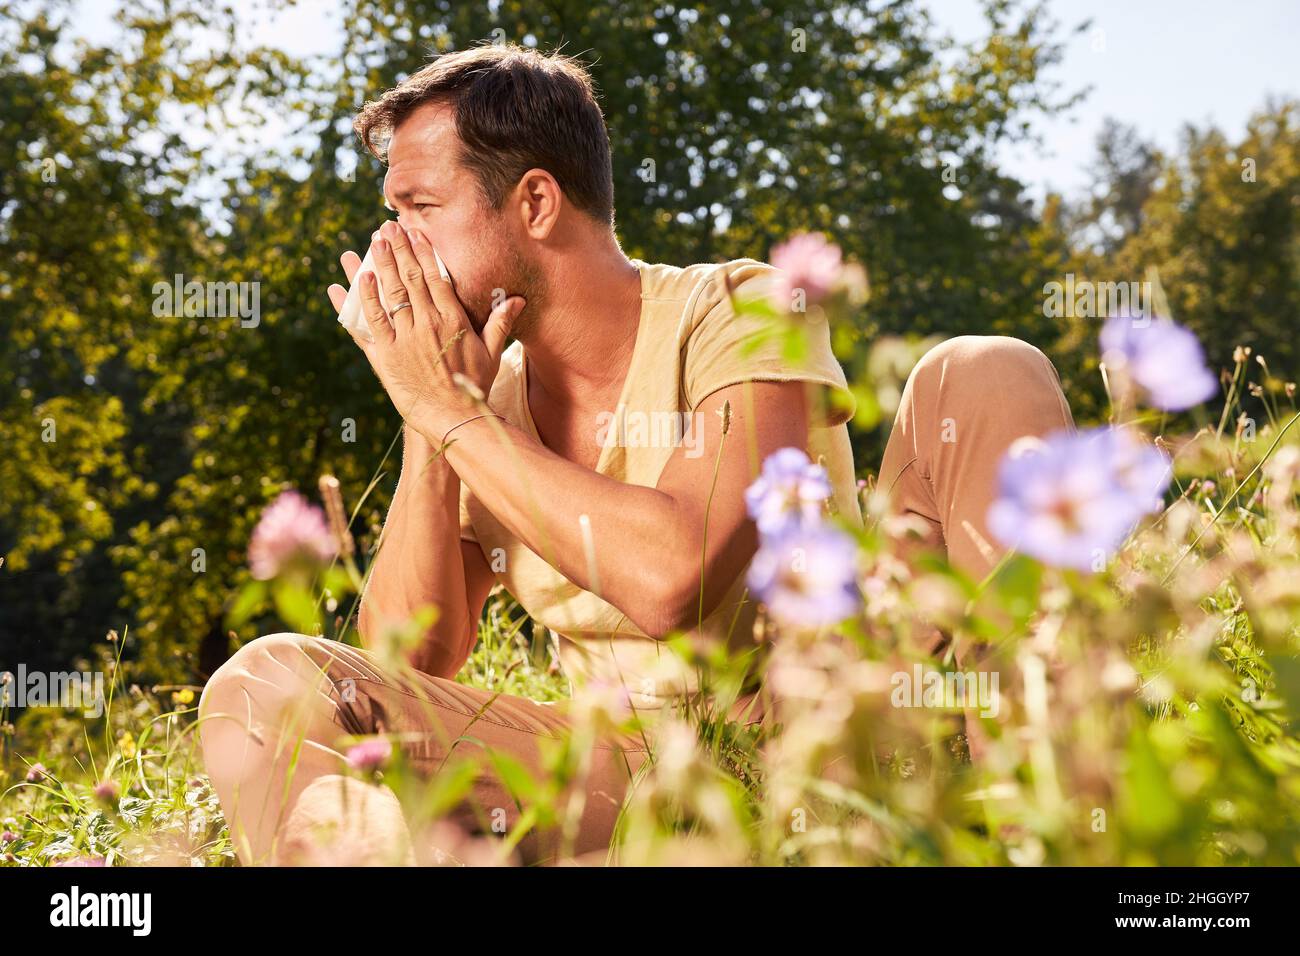 Man with pollen allergy sits among blooming flowers and blows his nose Stock Photo